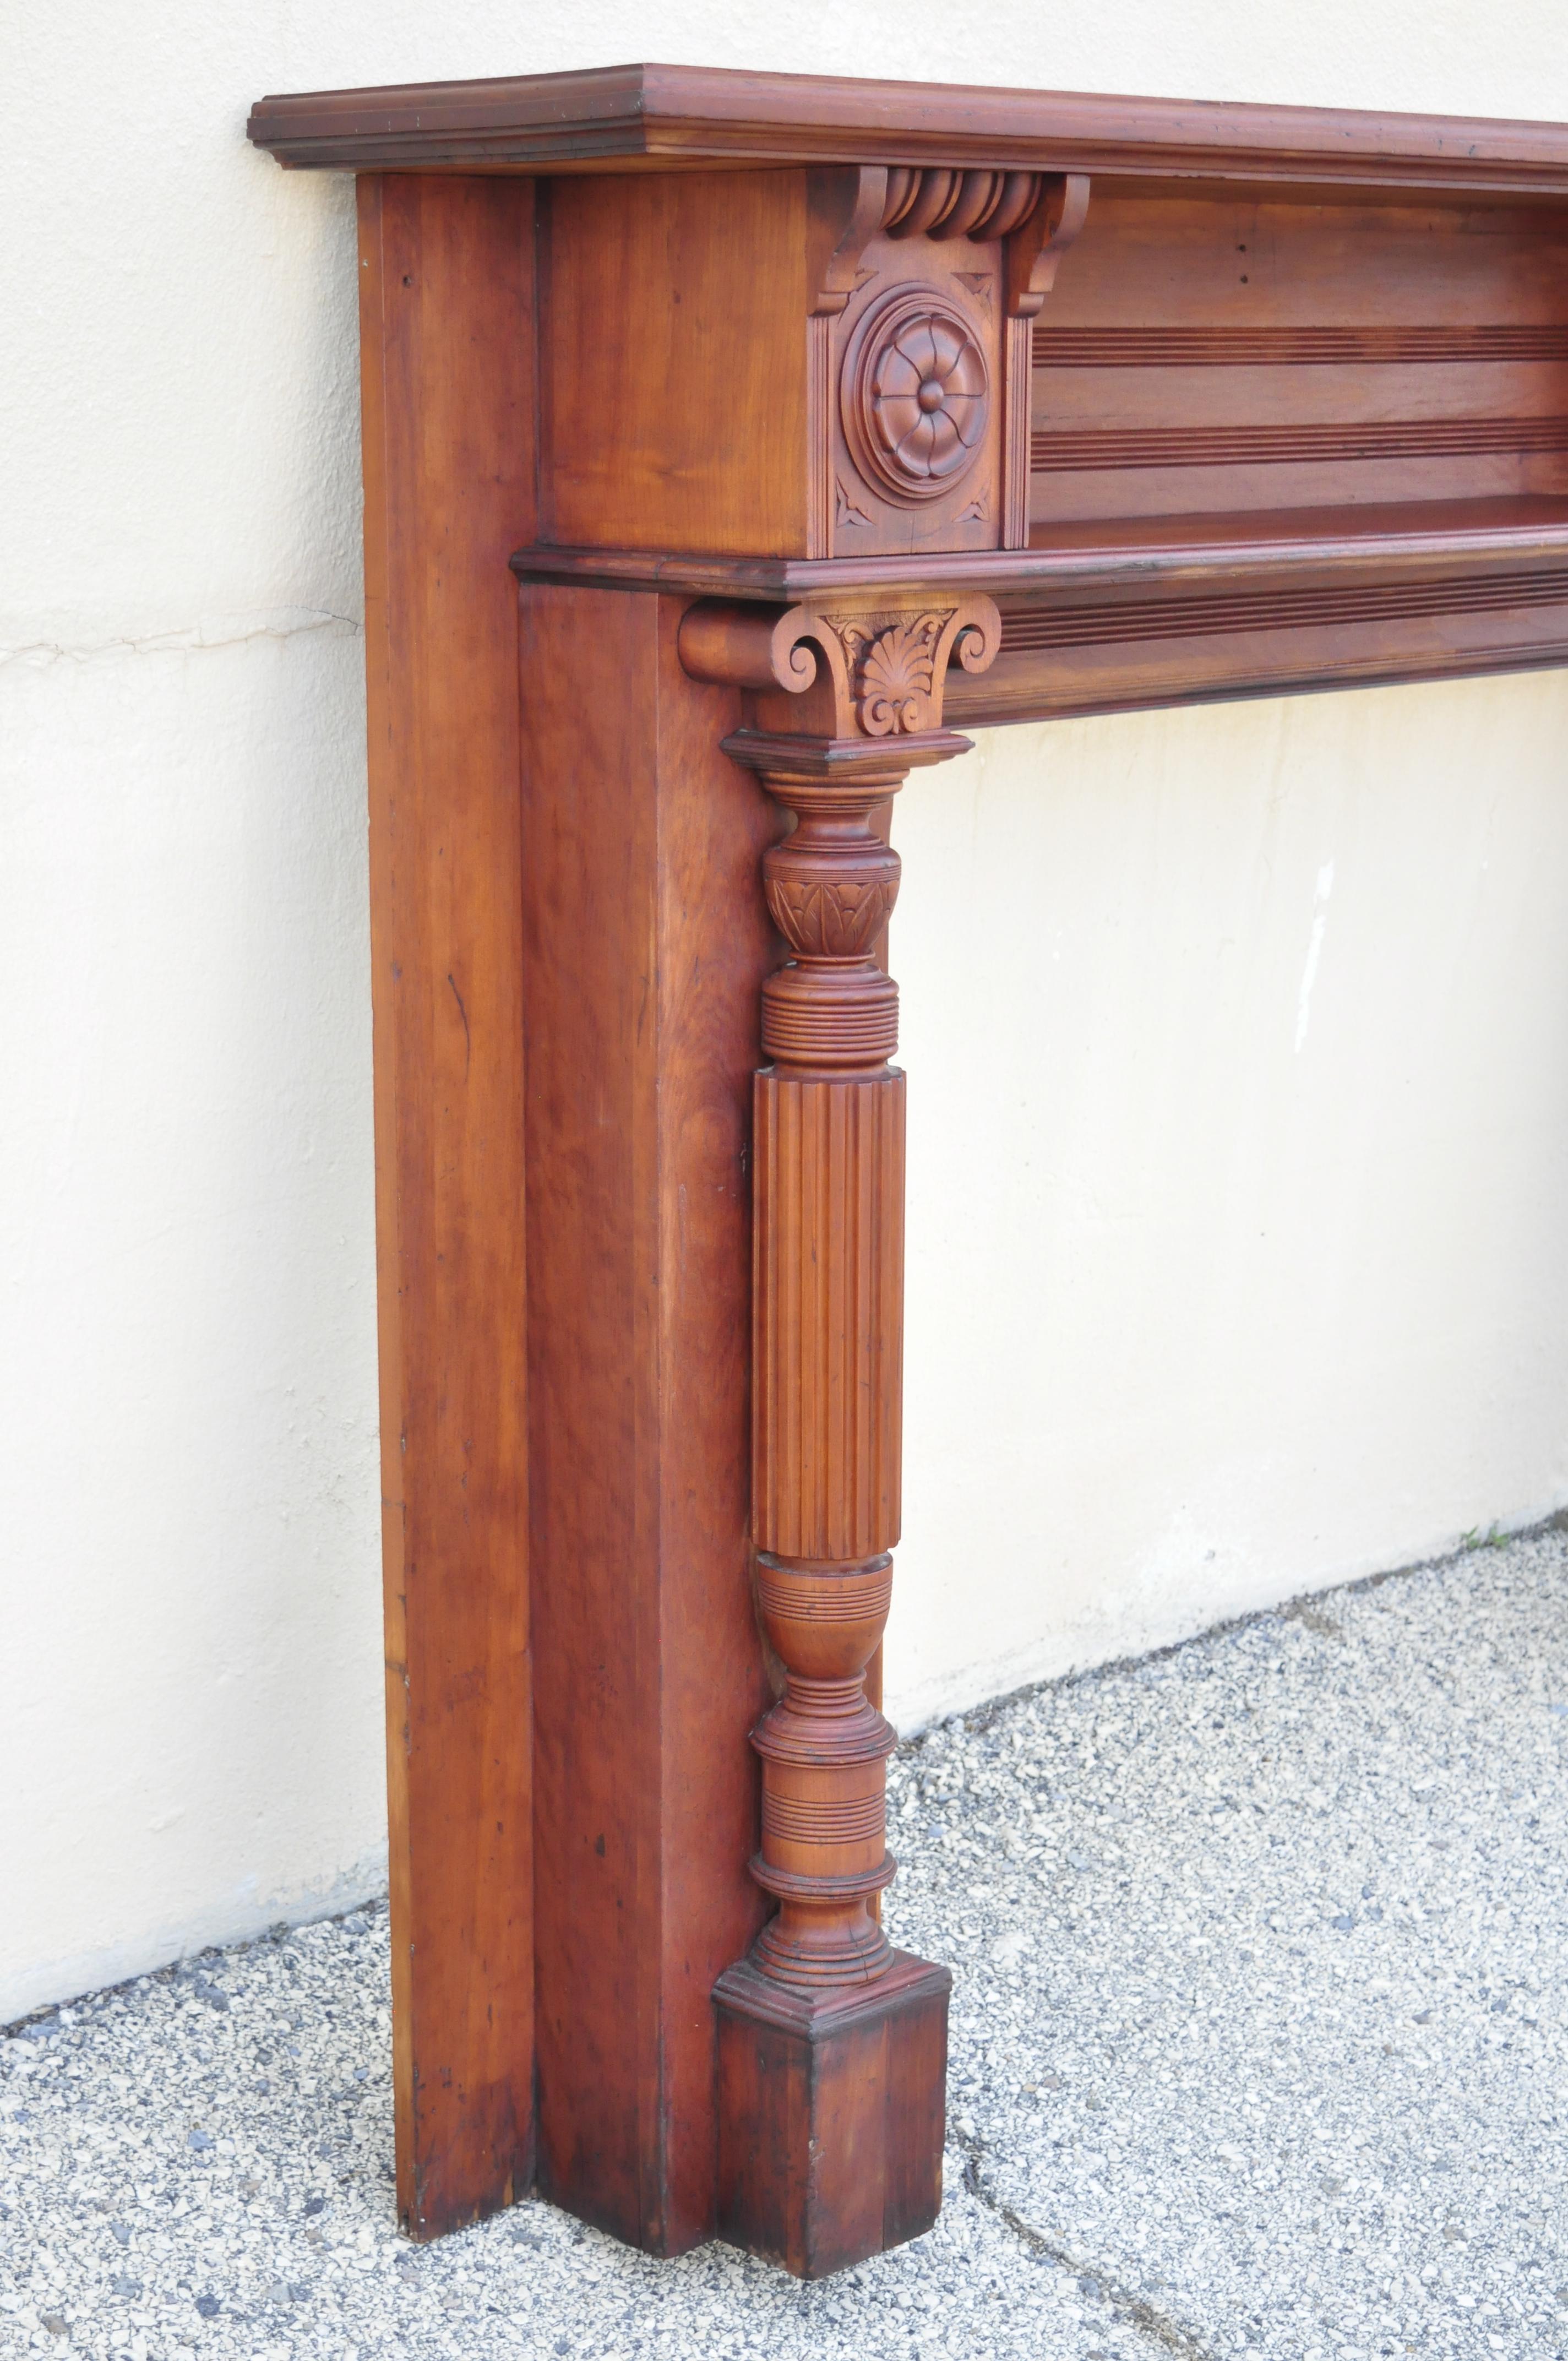 Antique American Victorian cherry wood carved column fireplace mantel shelf. Item features upper shelf, carved column supports, solid wood construction, beautiful wood grain, nicely carved details, original label, very nice antique item. Probably